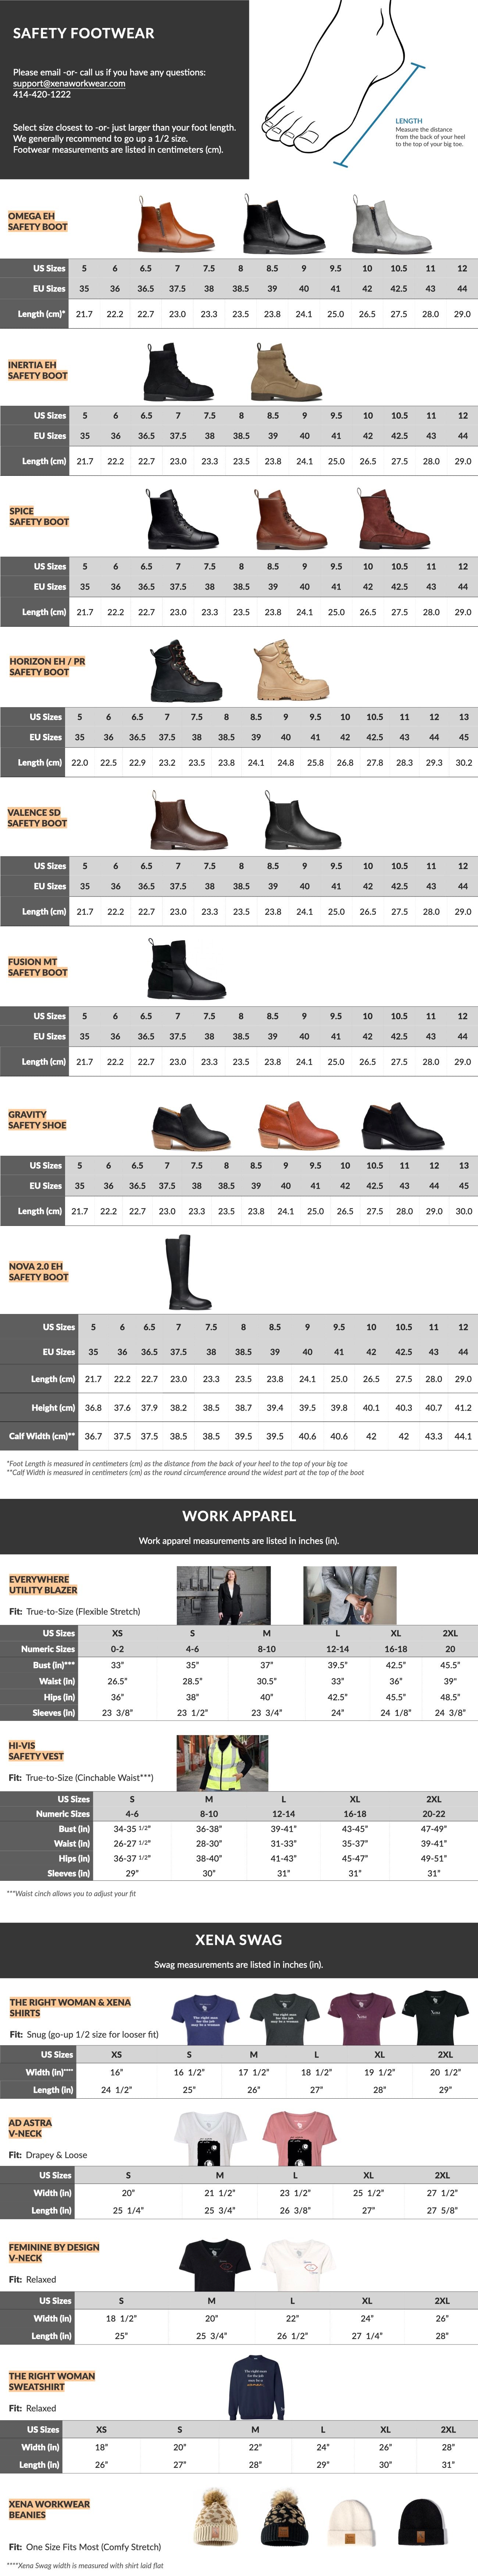 Stylish Steel Toe Boots, Safety Shoes, Work Apparel, Blazers, Hi-Vis Safety Vests, Shirts, and Beanies designed for Women by Women from Xena Workwear - Global Size Chart